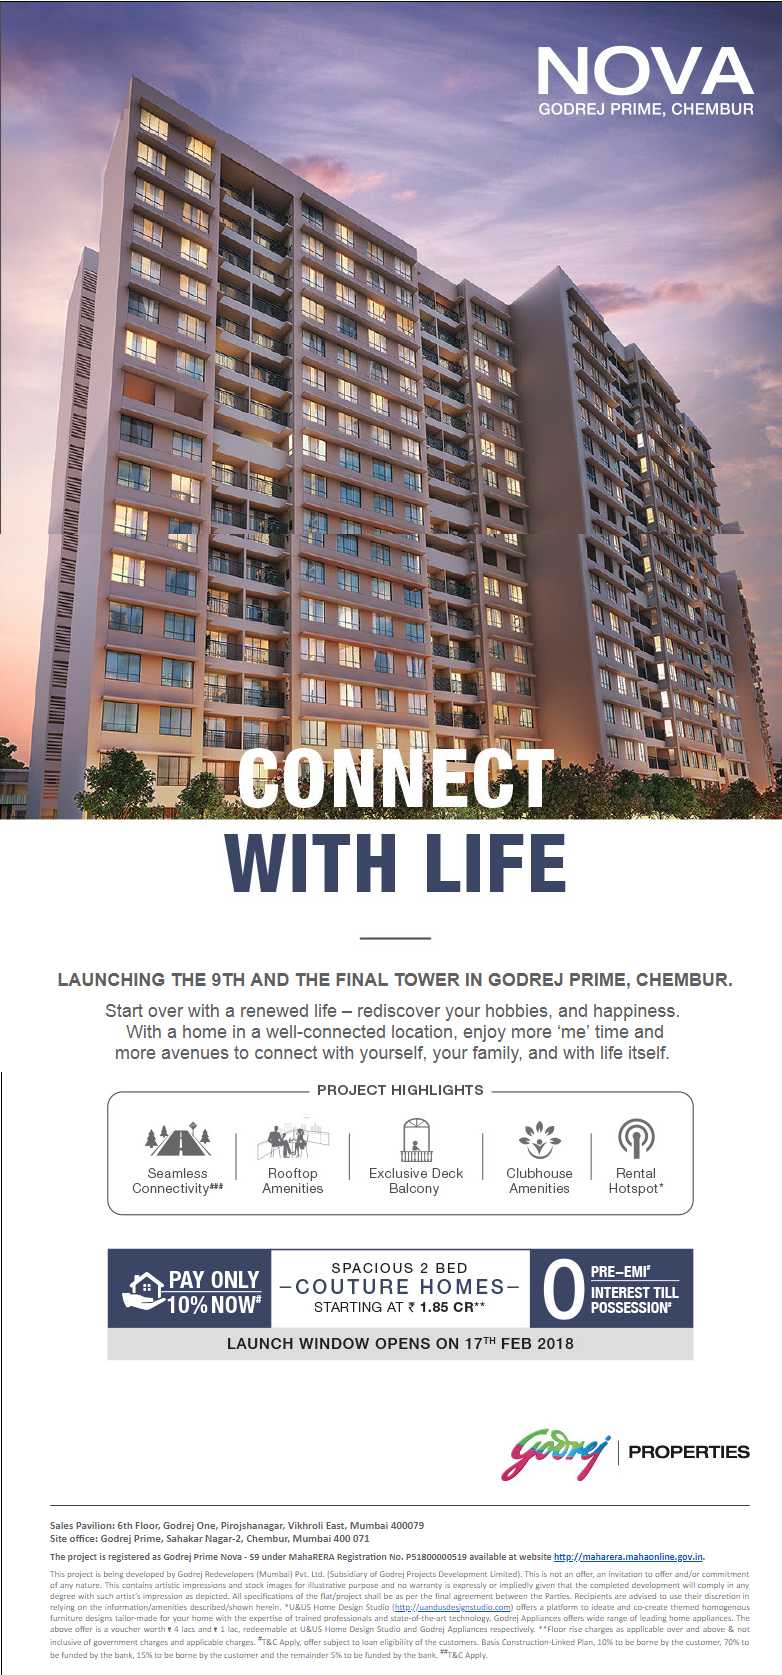 Launching the 9th and the final tower in Godrej Prime Nova, Mumbai